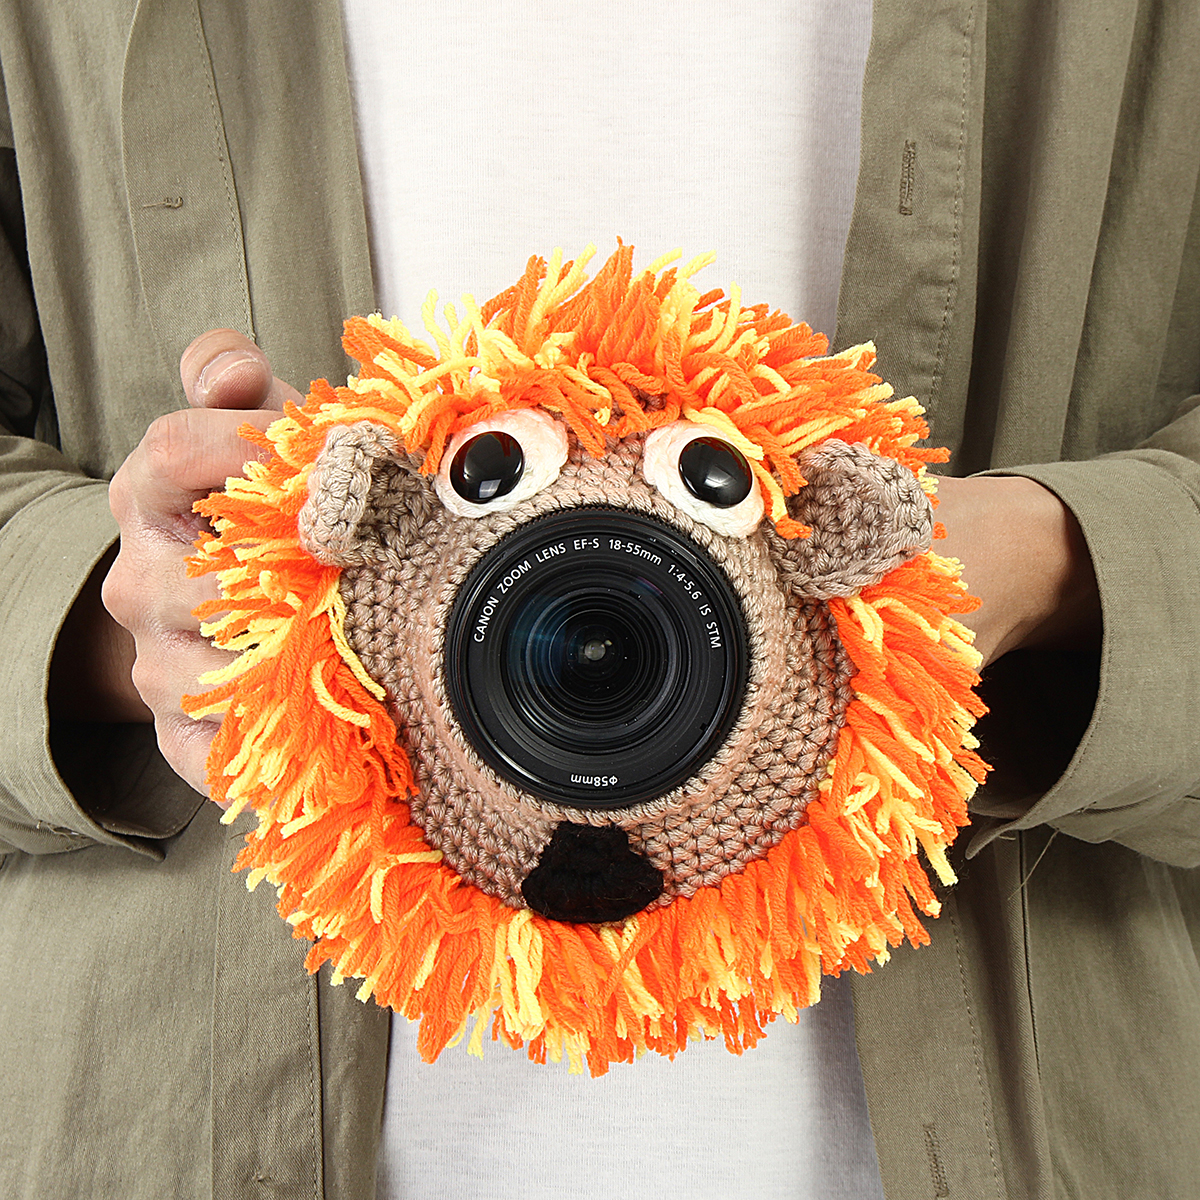 Hand-knitted Wool Decor Case For Camera Lens Decorative Photo Guide Doll Toys For Kids